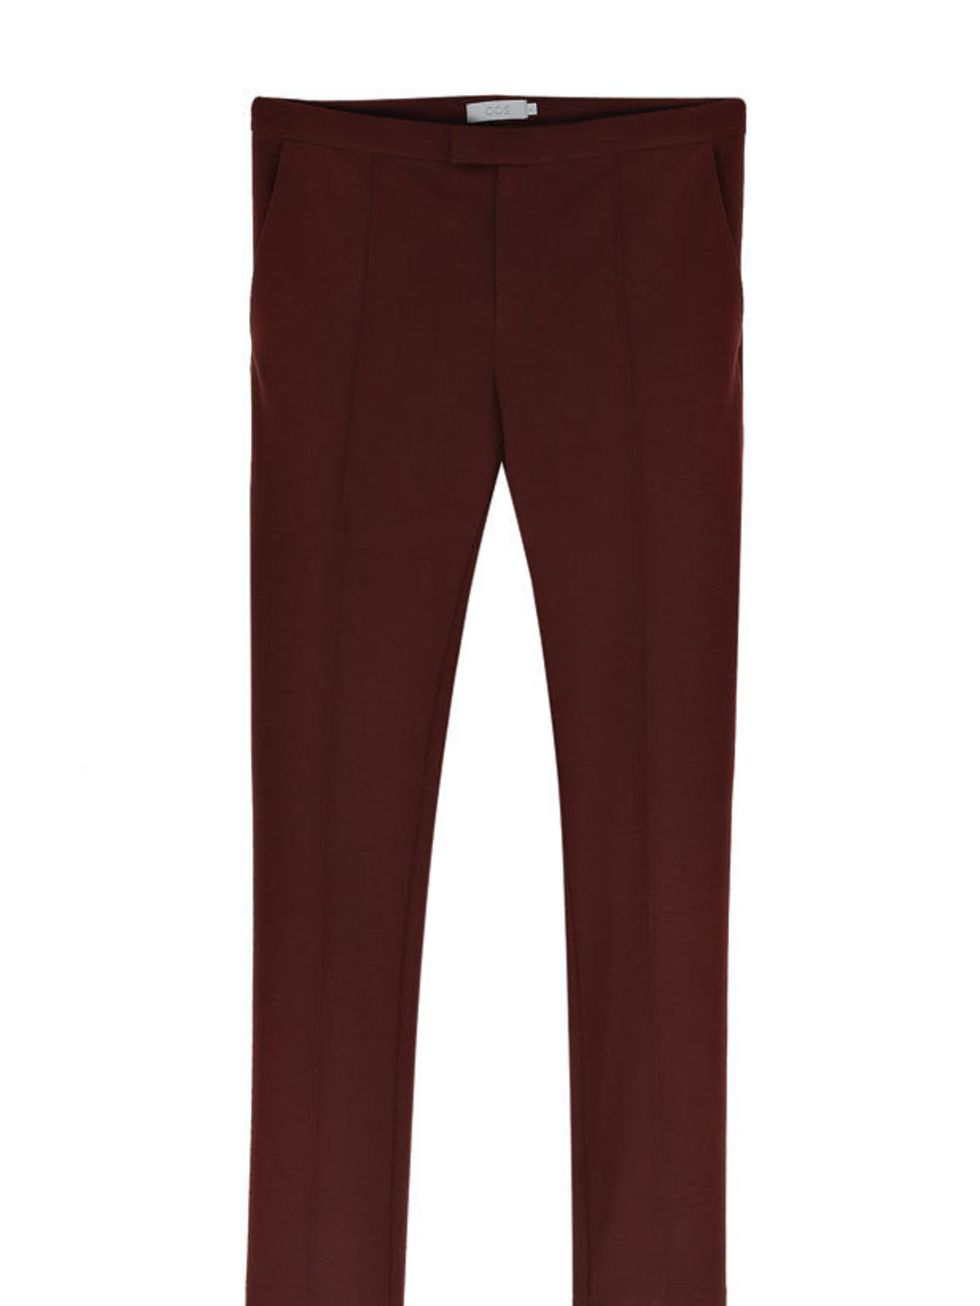 <p>Cos 'Milano' rib slim trousers, £59, for stockists call 0207 478 0400</p>